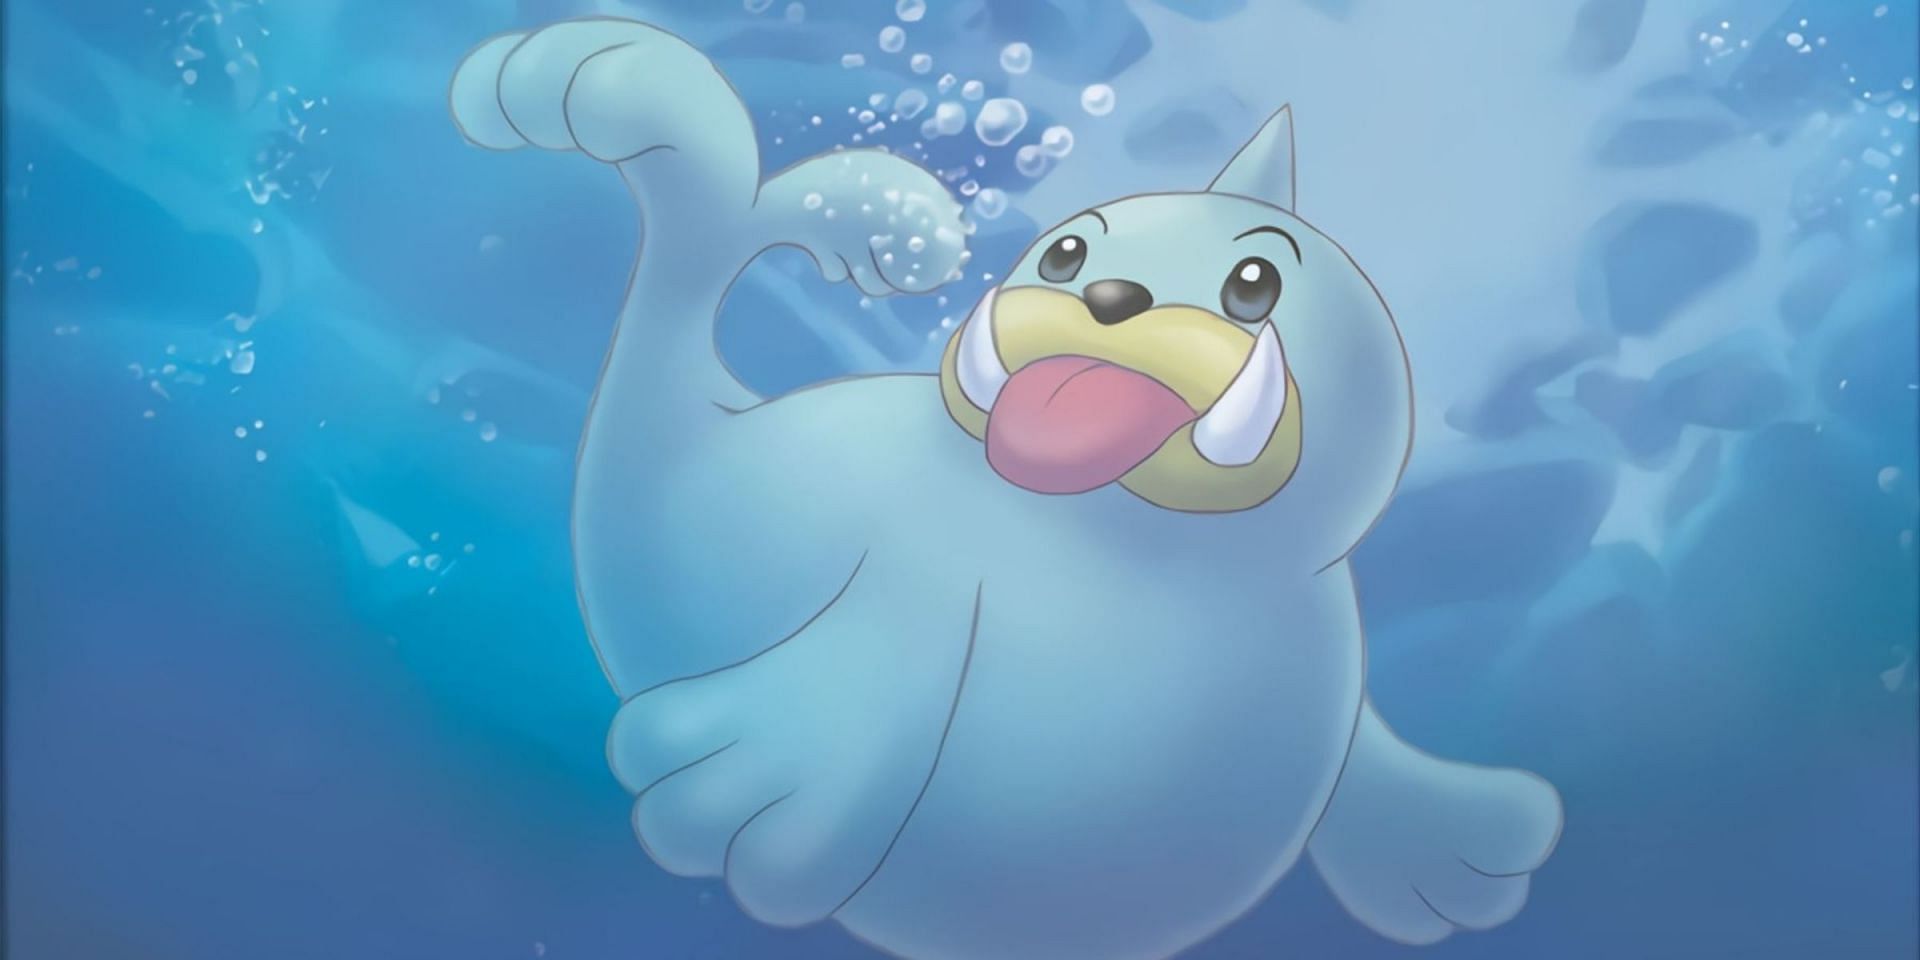 Seel as seen in the Pokemon Trading Card game (Image via The Pokemon Company)